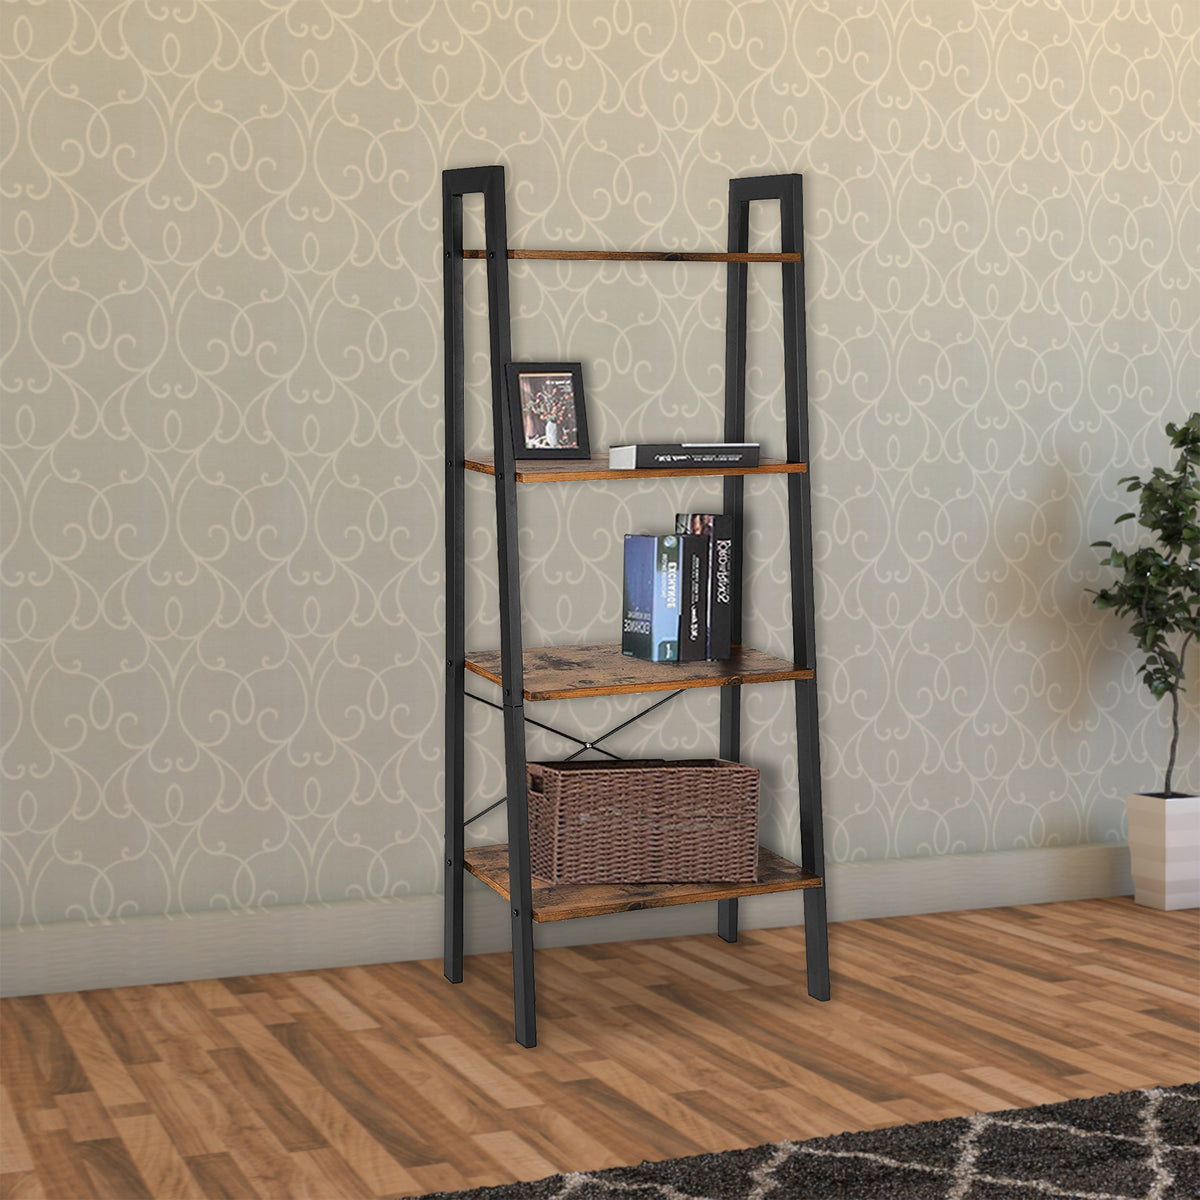 Four Tiered Rustic Wooden Ladder Shelf with Iron Framework, Brown and Black - BM193923